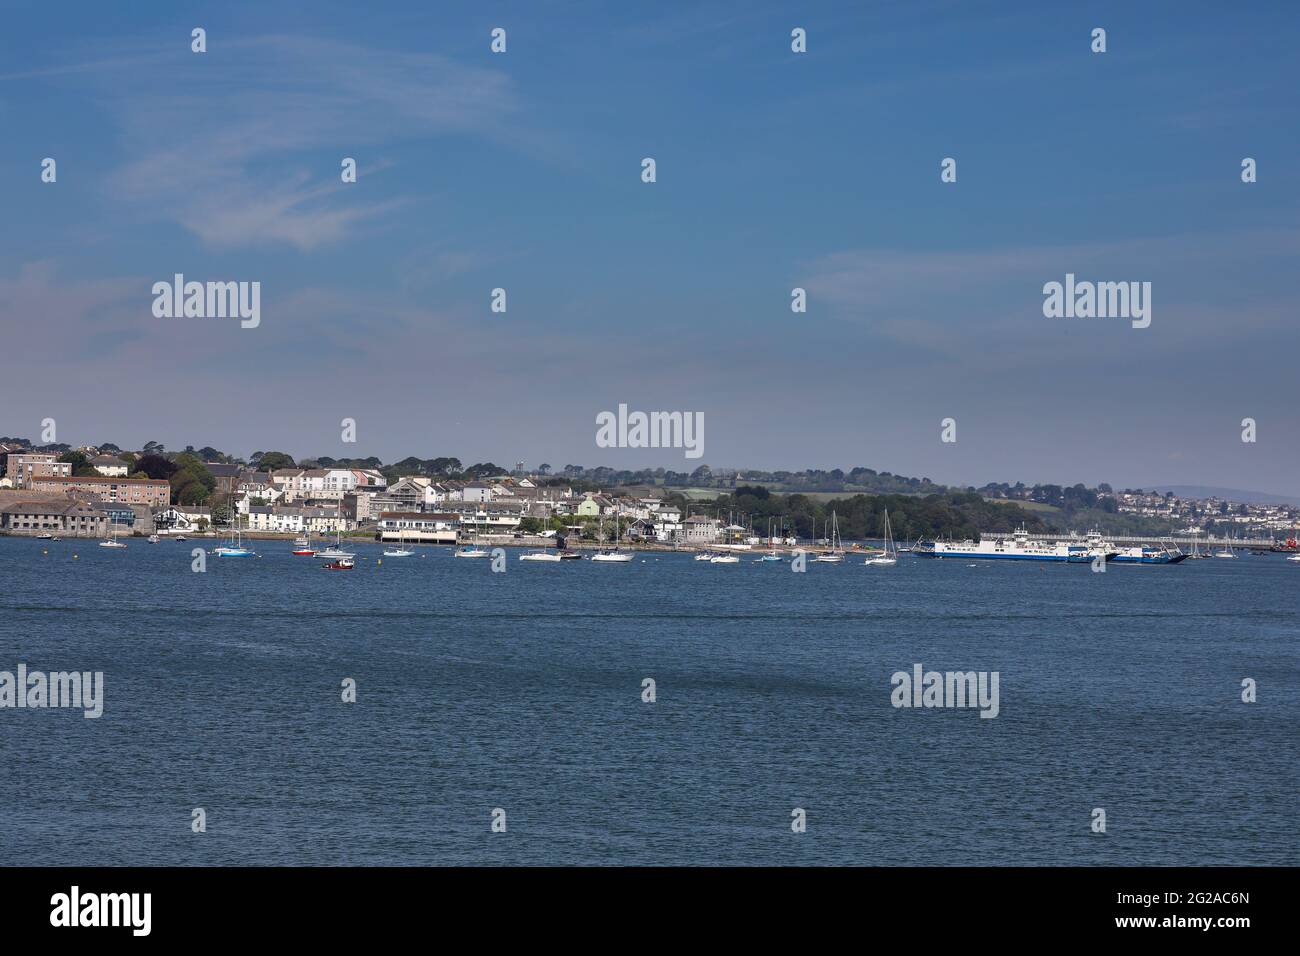 Torpoint and the ferry, Cornwall, England Stock Photo